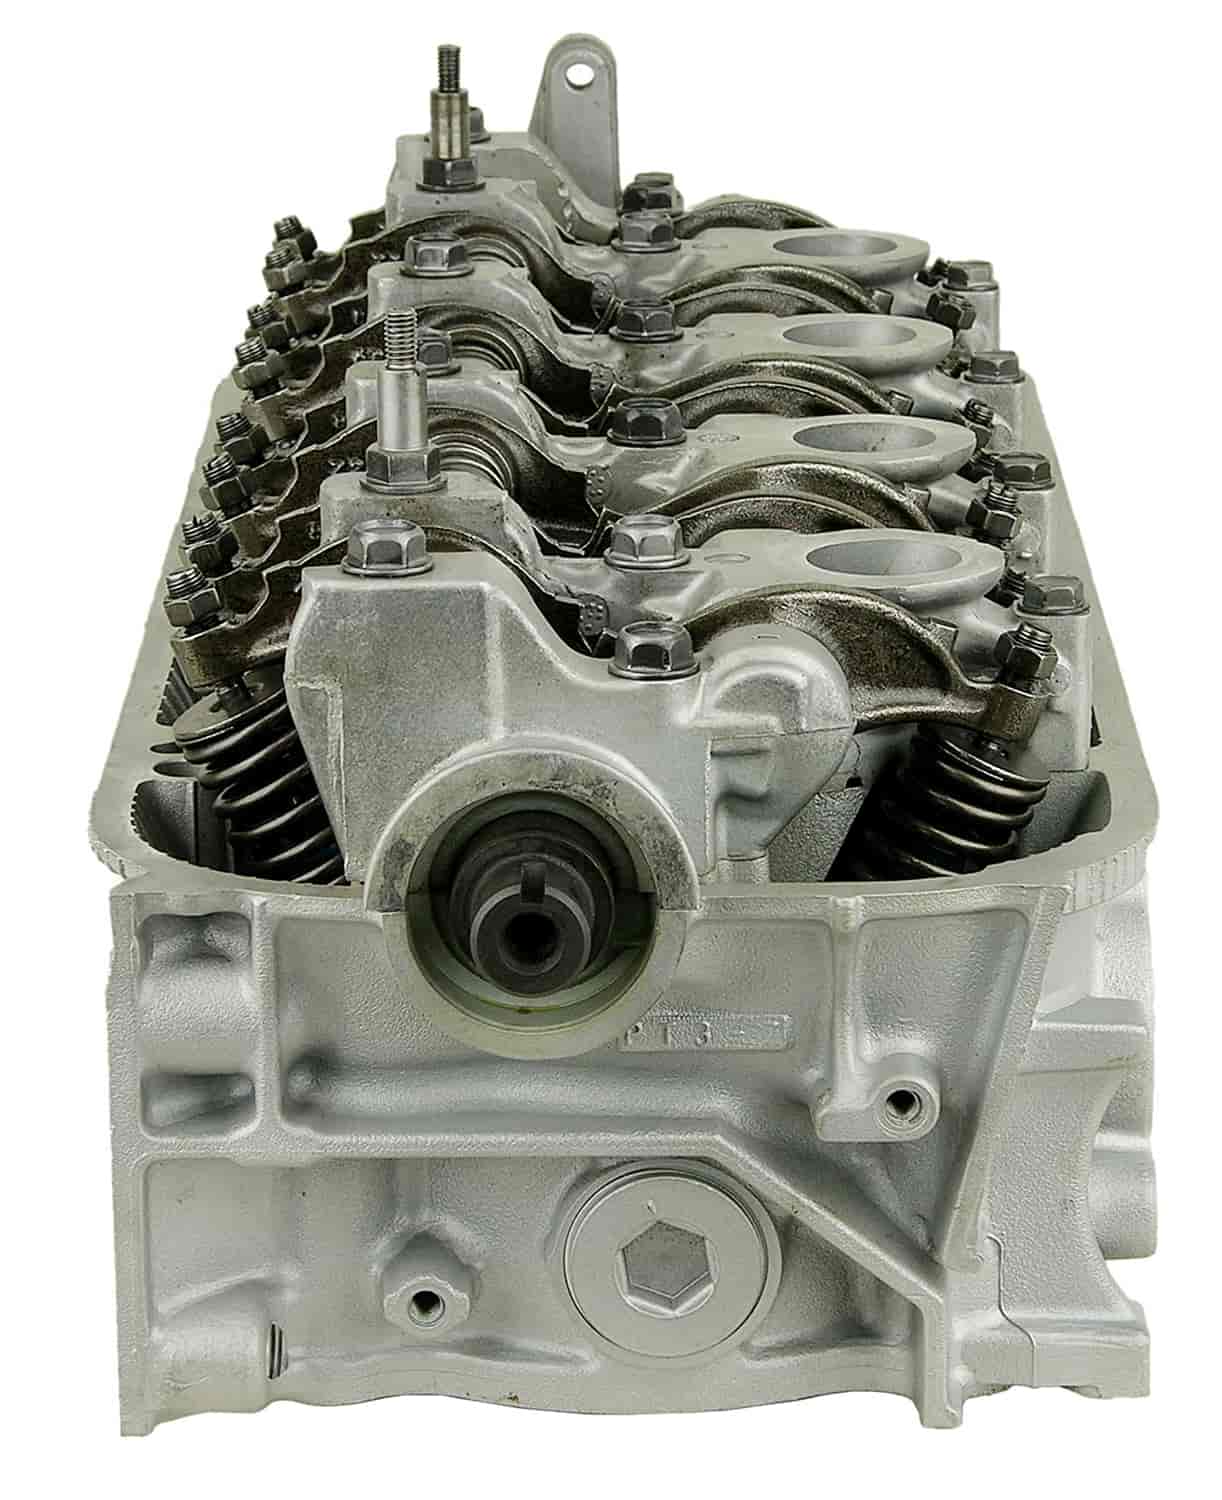 Remanufactured Cylinder Head for 1992-1996 Honda Accord & Prelude with 2.2L L4 F22A1/F22A6